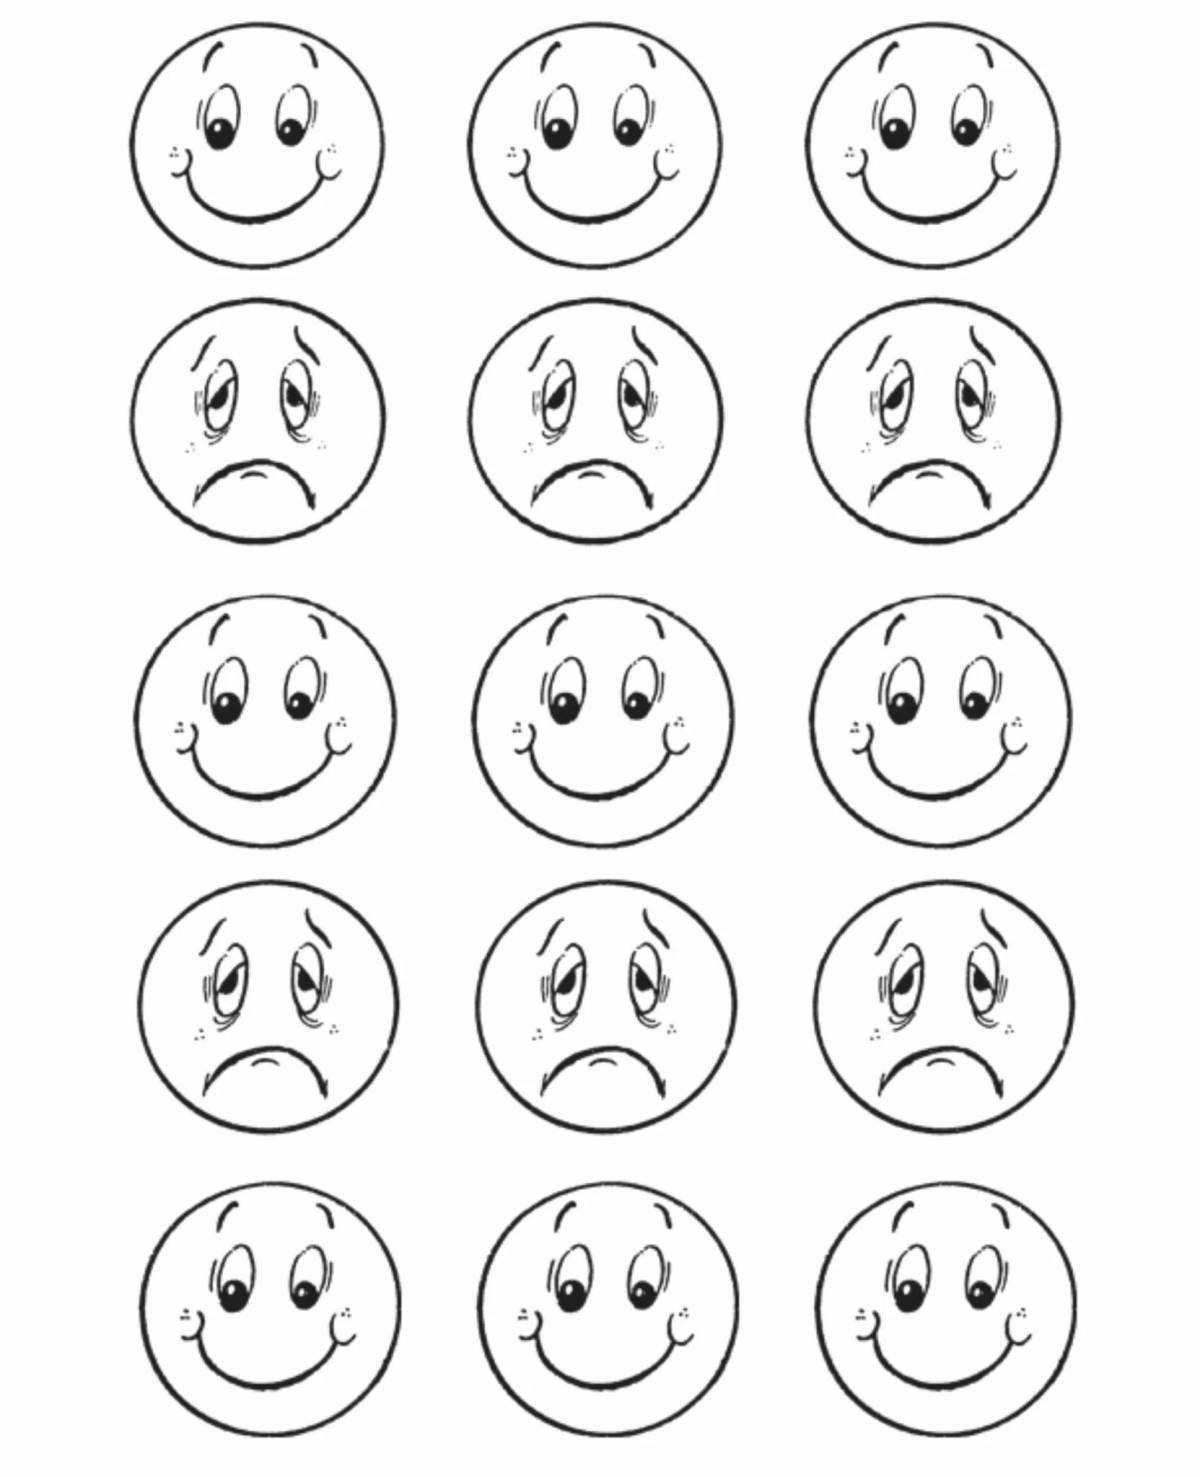 Coloring book emotions with a smirk for preschoolers